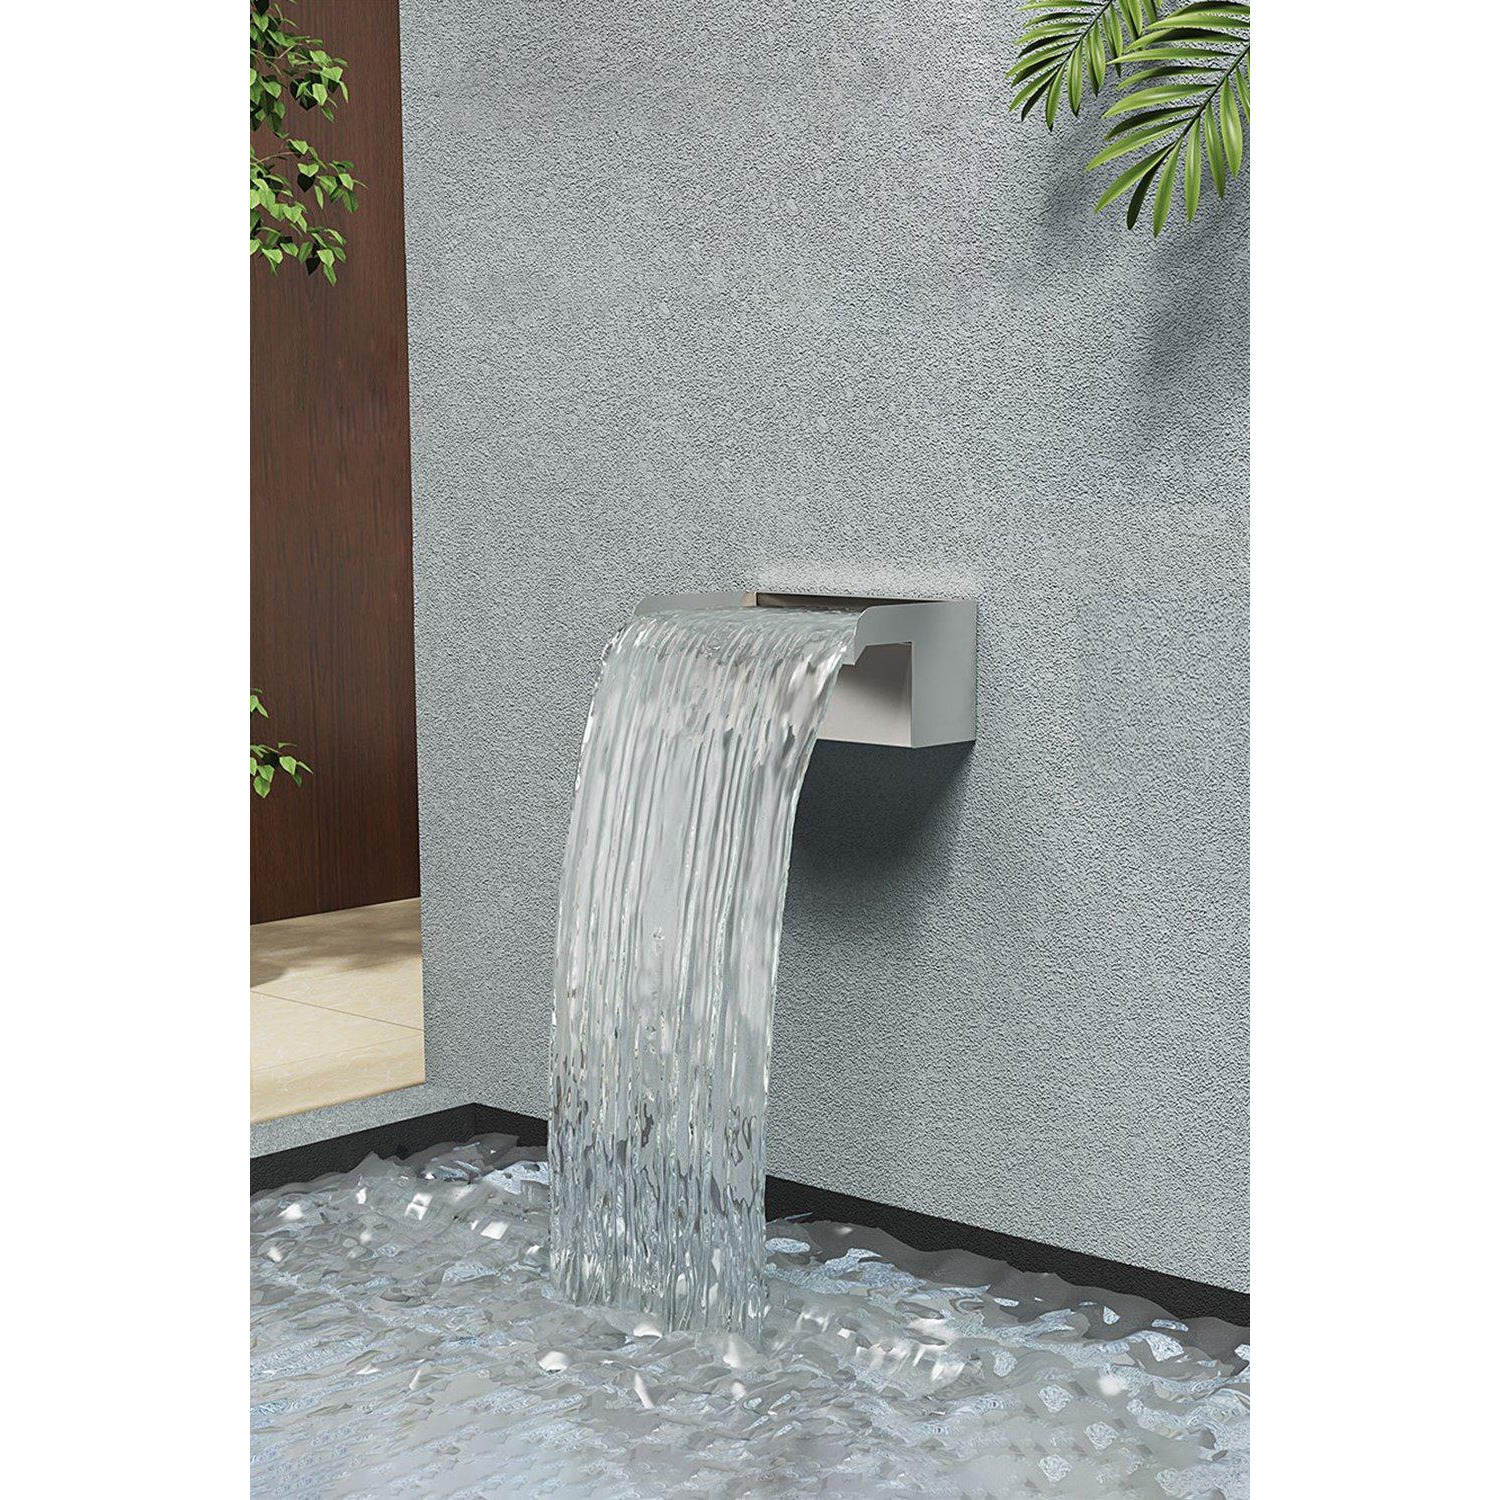 20cmW Back Entry Wall-Mounted Water Blade Waterfall Pool Fountain Garden - image 1